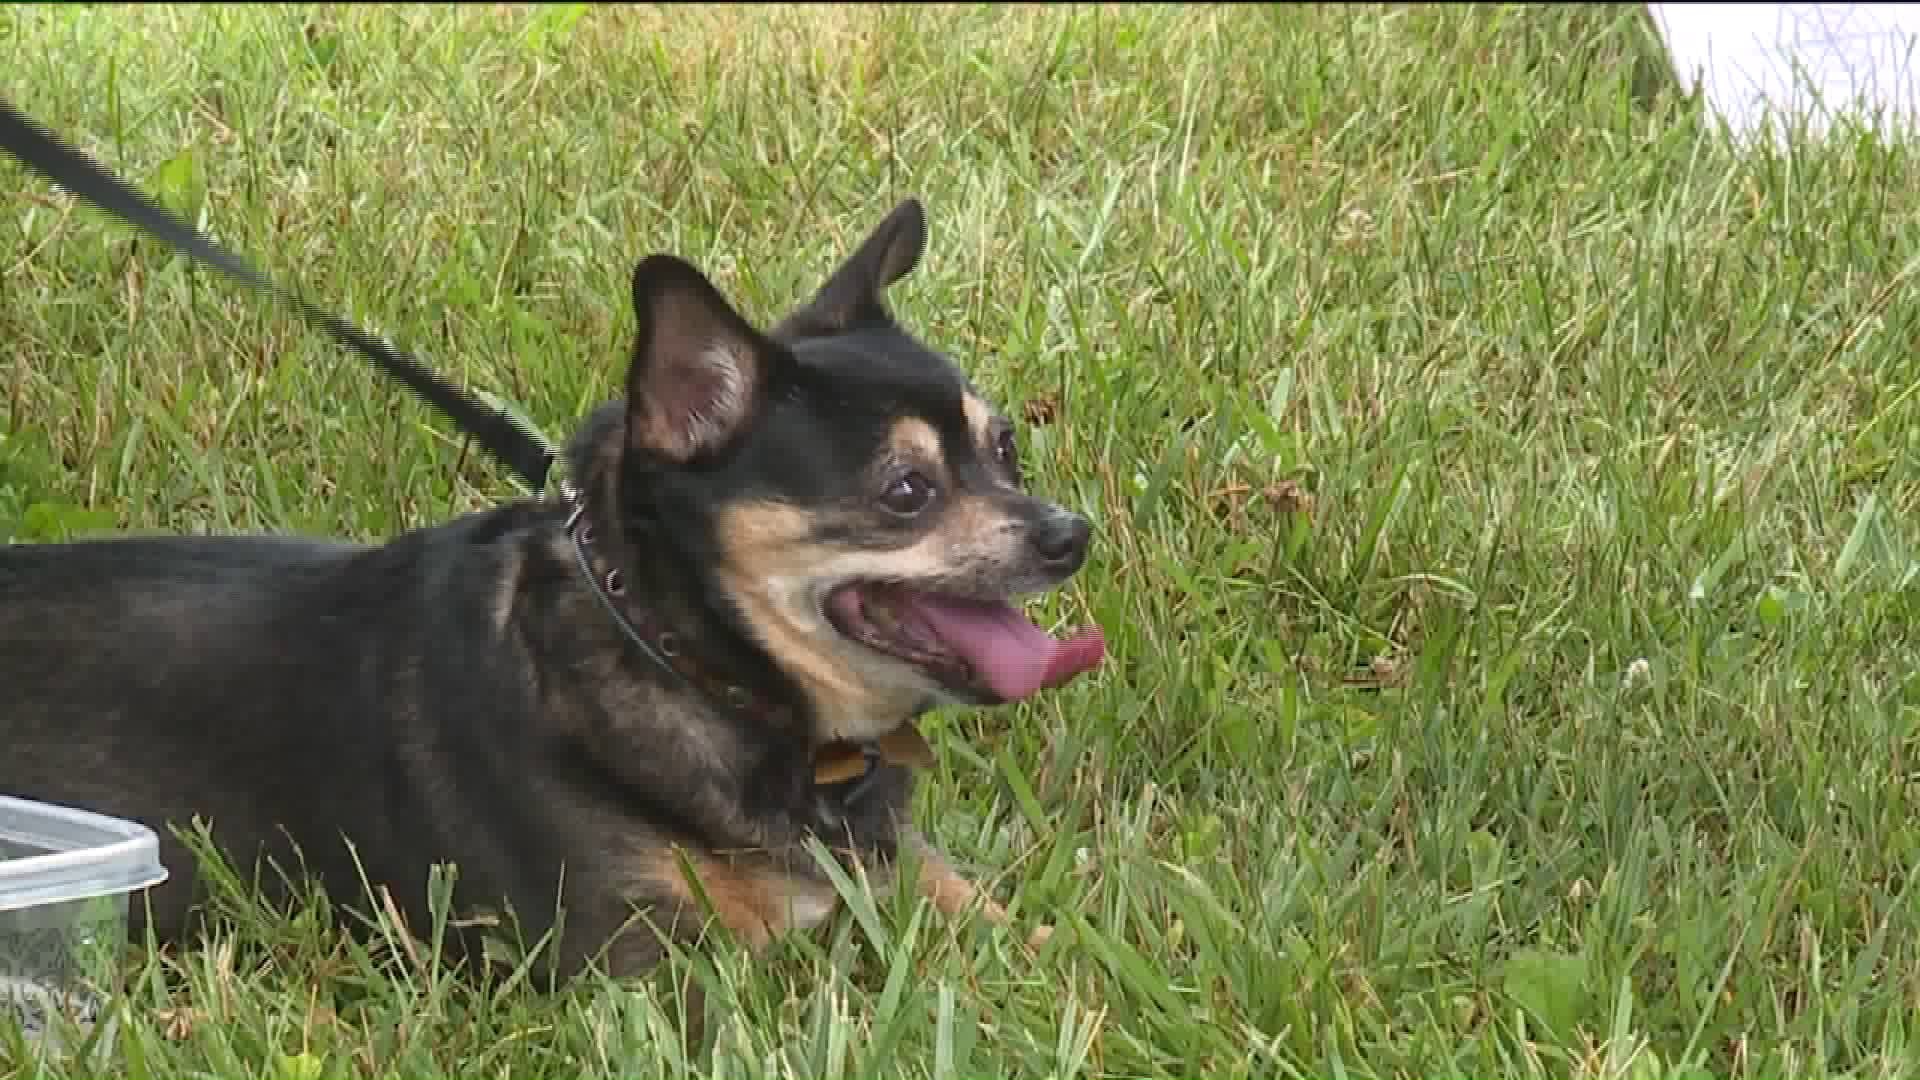 Grand Opening for New Dog Park in Archbald